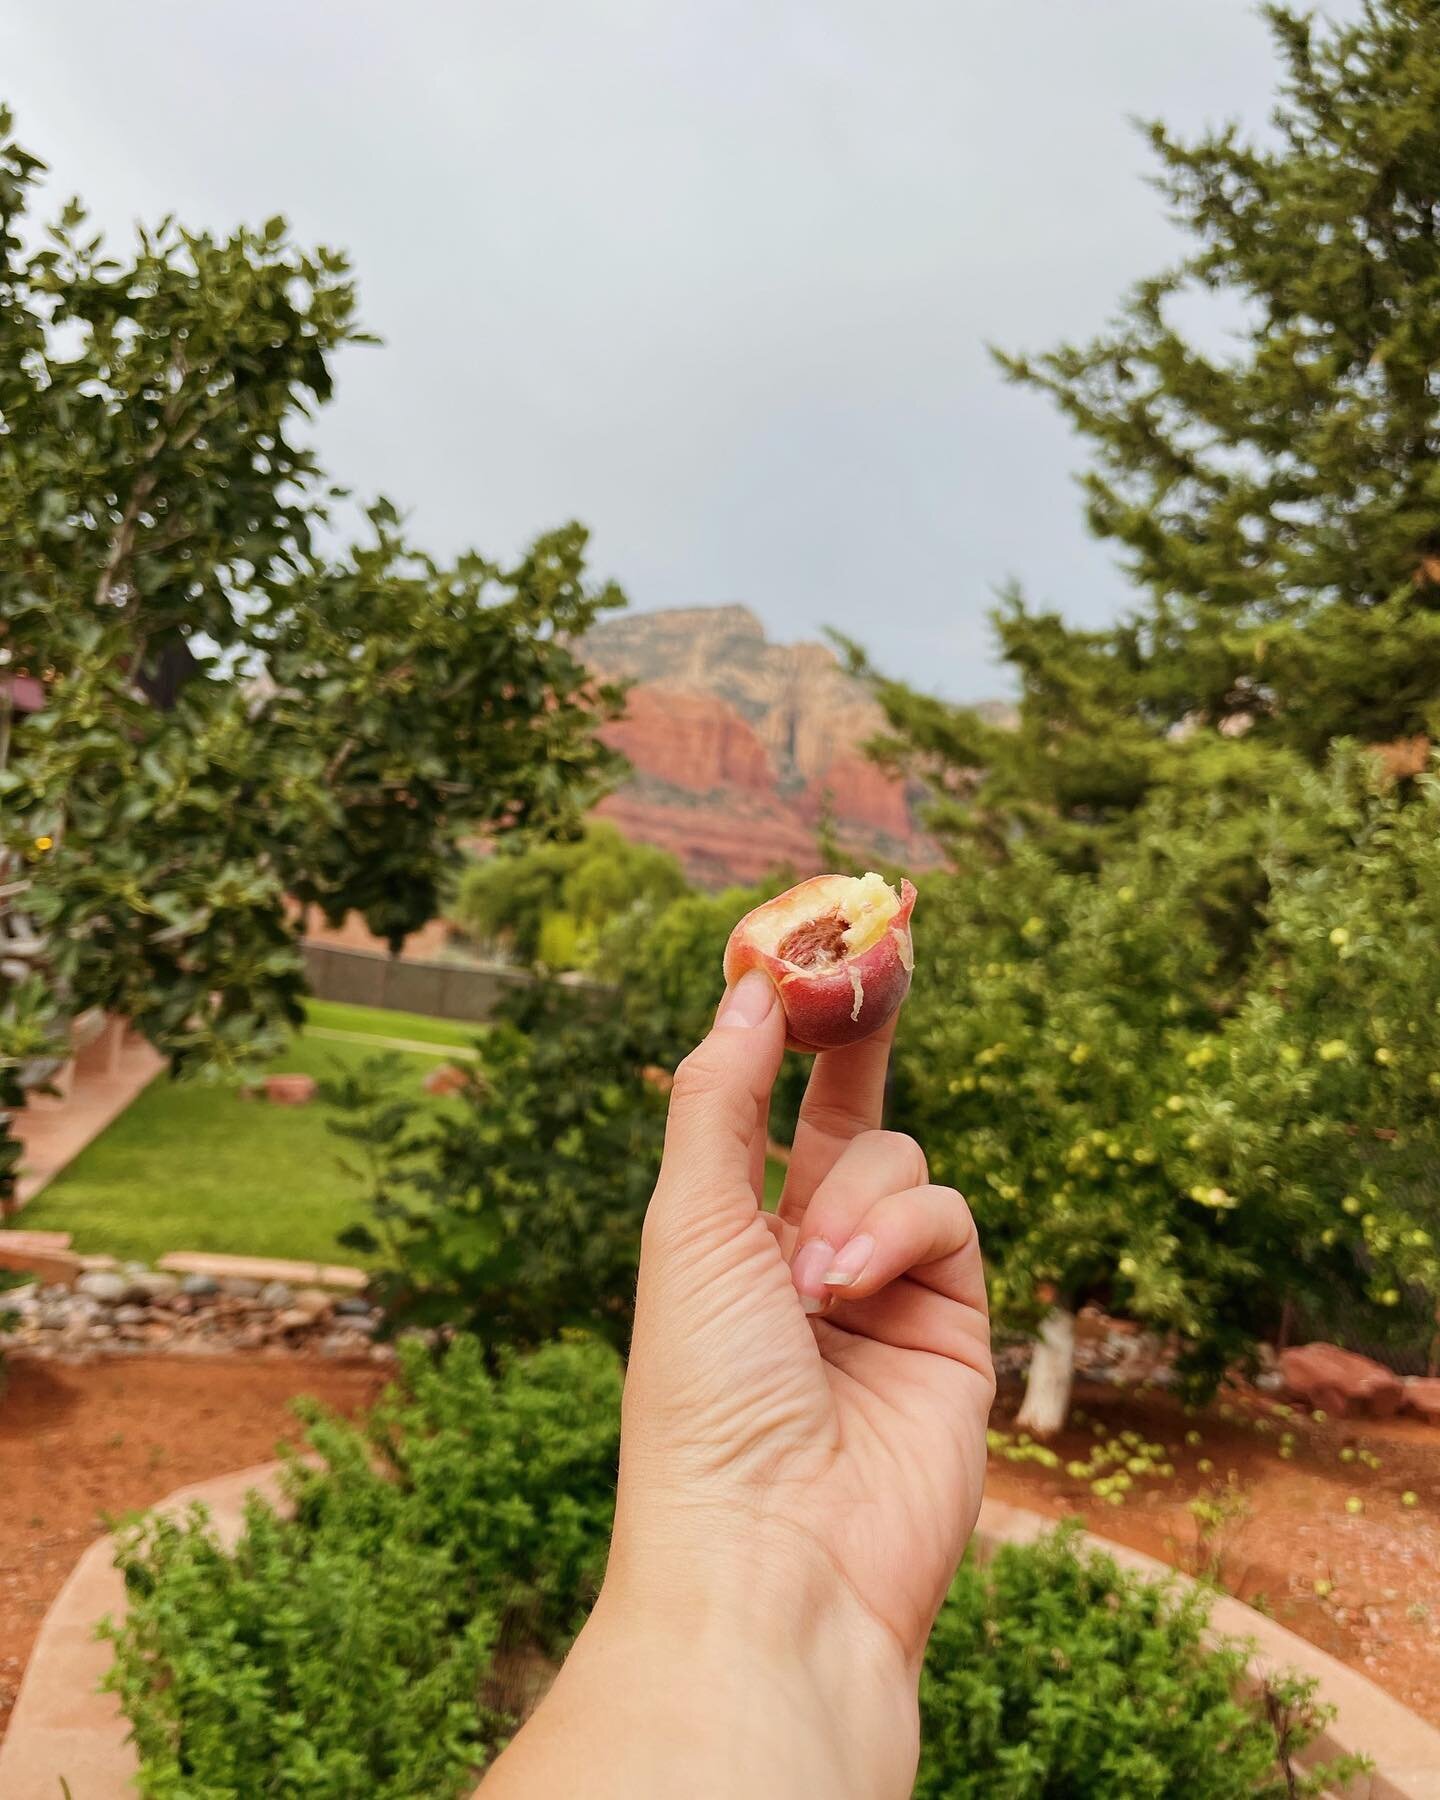 Living off the land 🏜🍑 There is something special about a place that retains its raw, purest form of beauty&hellip; Sedona, Arizona &mdash; rich in discovery, adventure, and exploration. Untouched by the modern world, you can feel the natural energ